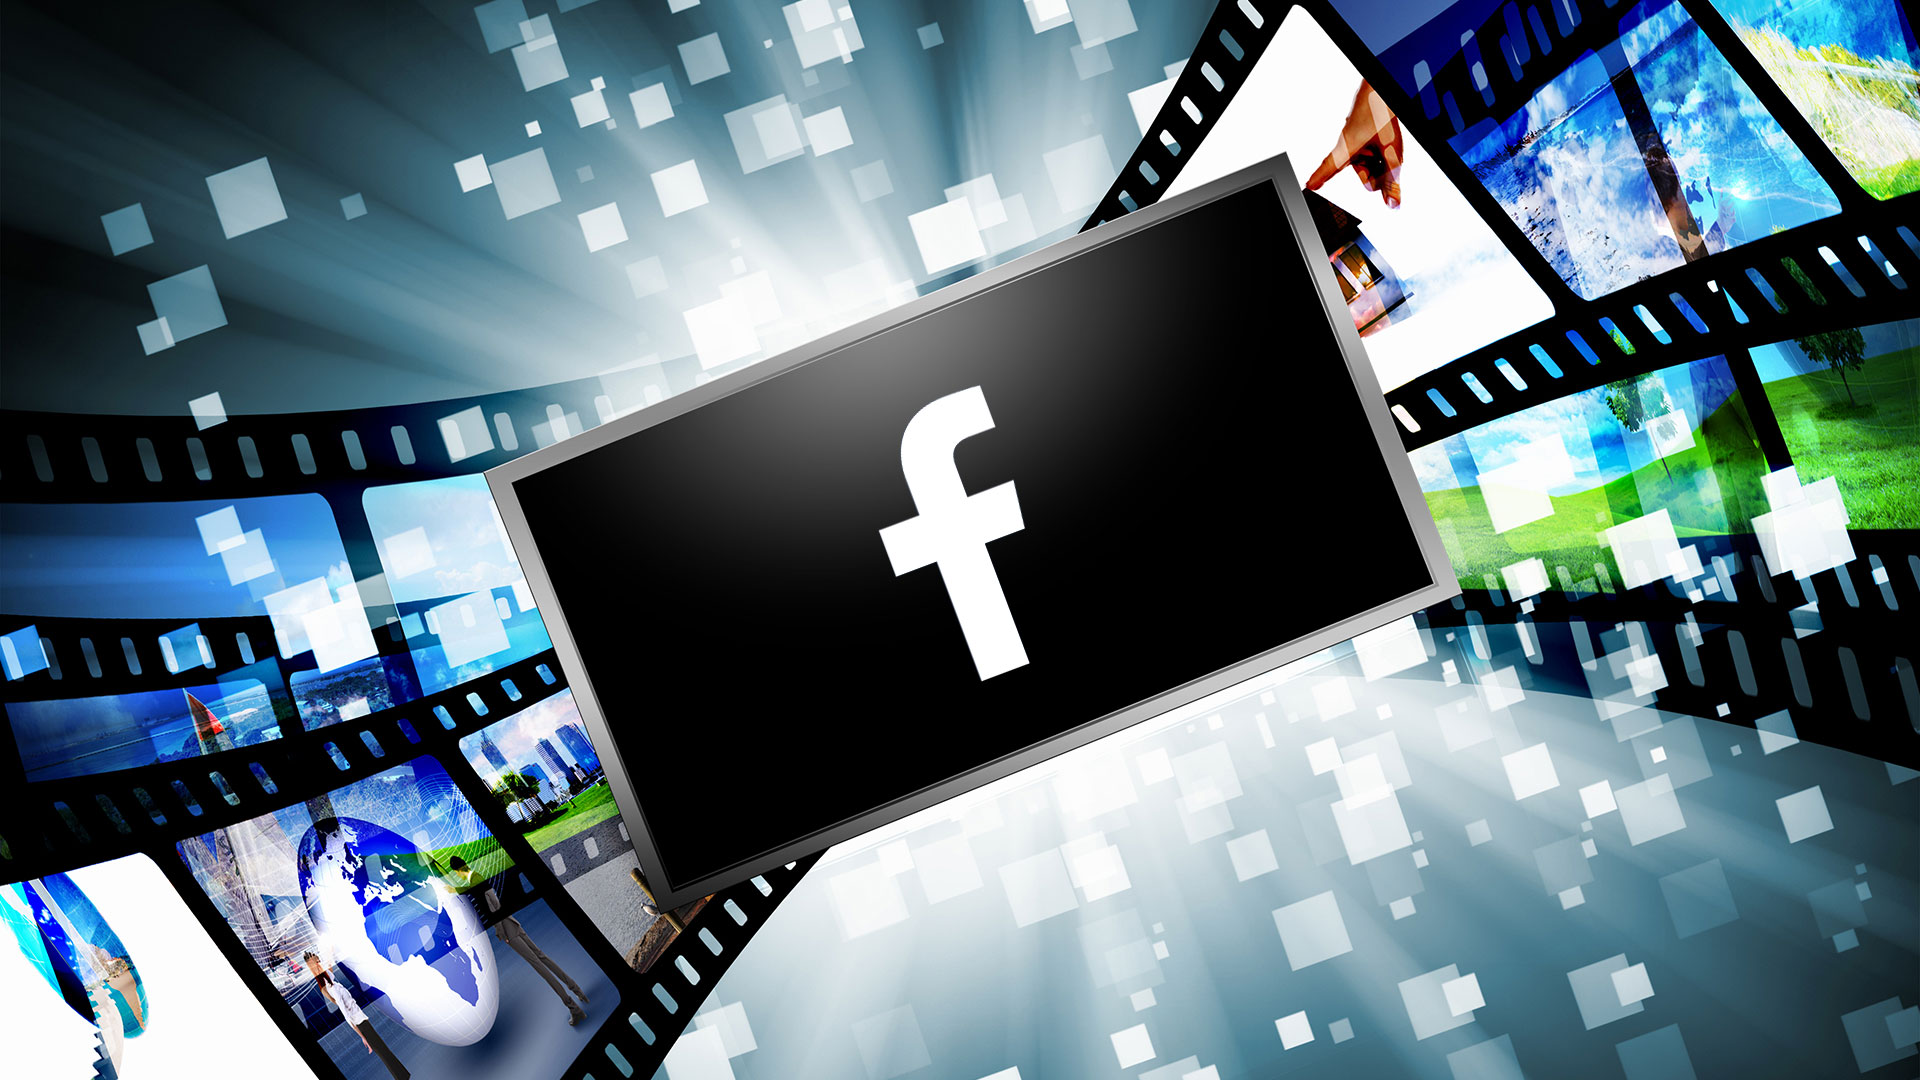 Facebook announces video app for streaming video content to Apple TV, Amazon Fire TV and other streaming devices